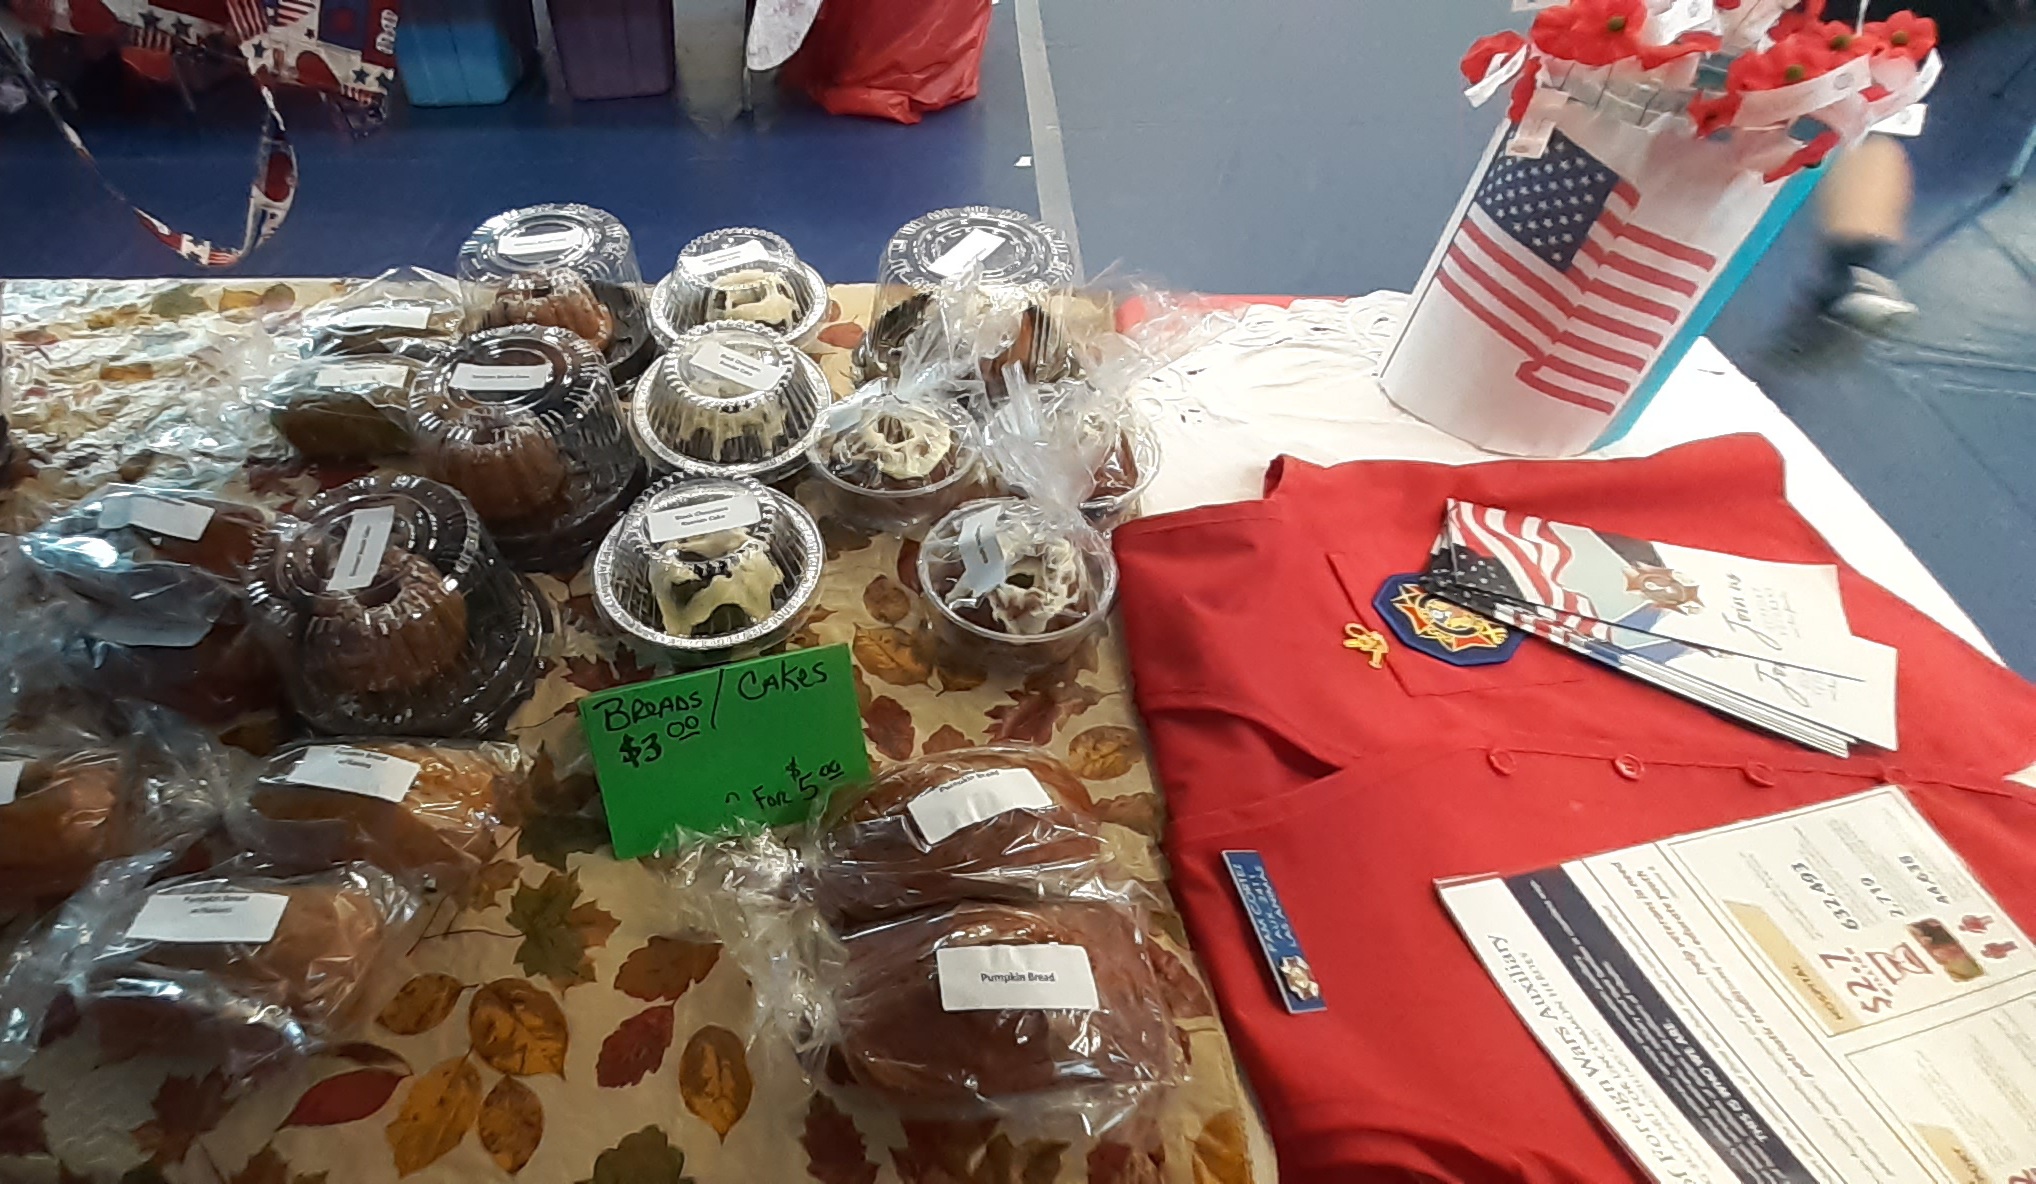 VFW Baked Goods seconews.org 